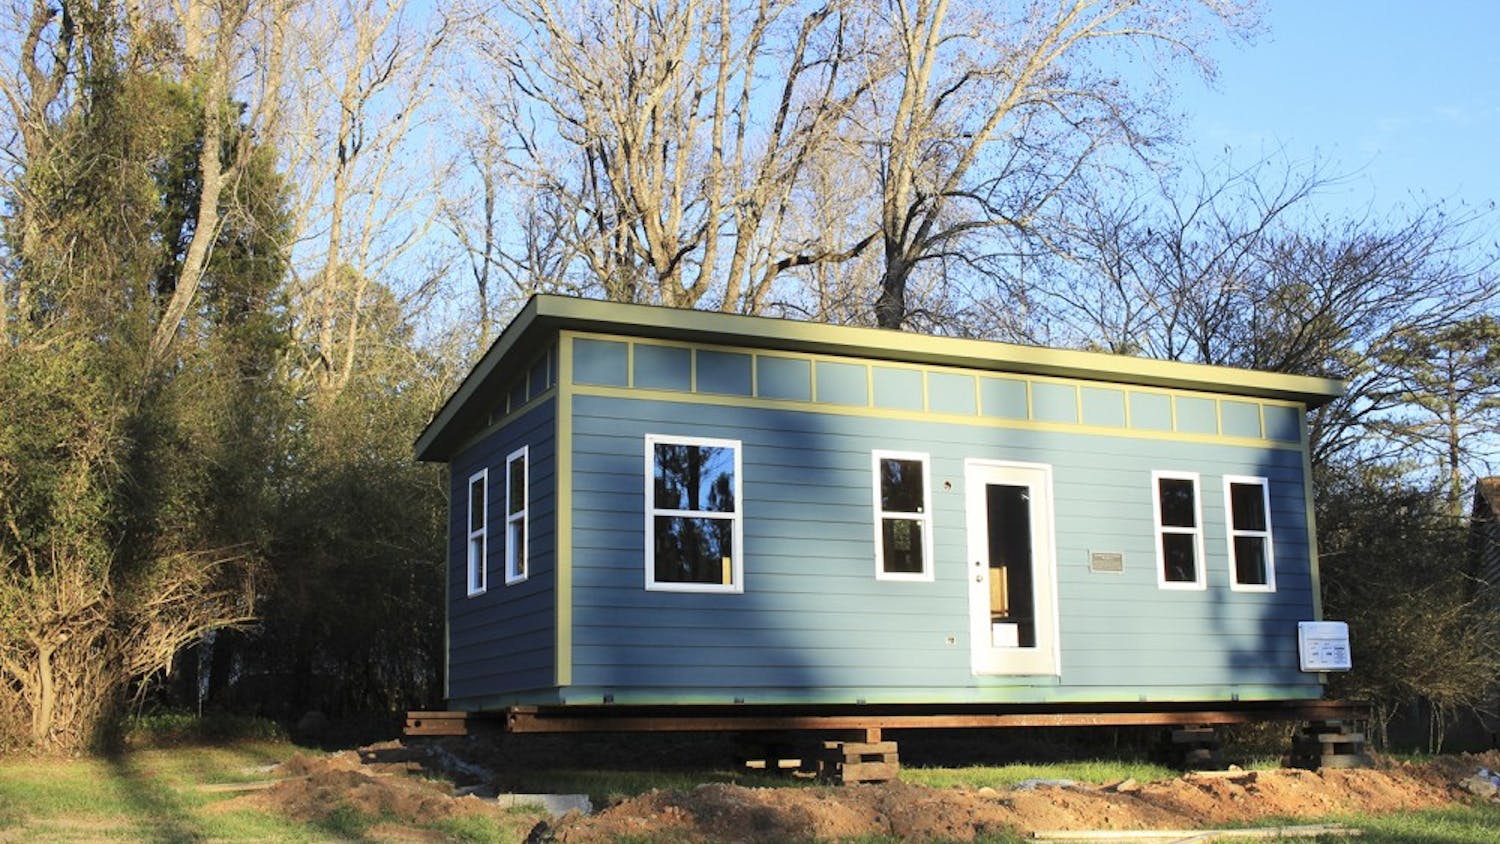 UNC's Center for Excellence in Community Mental Health is helping create a tiny home community at the Farm at Penny Lane for homeless people with mental illness.